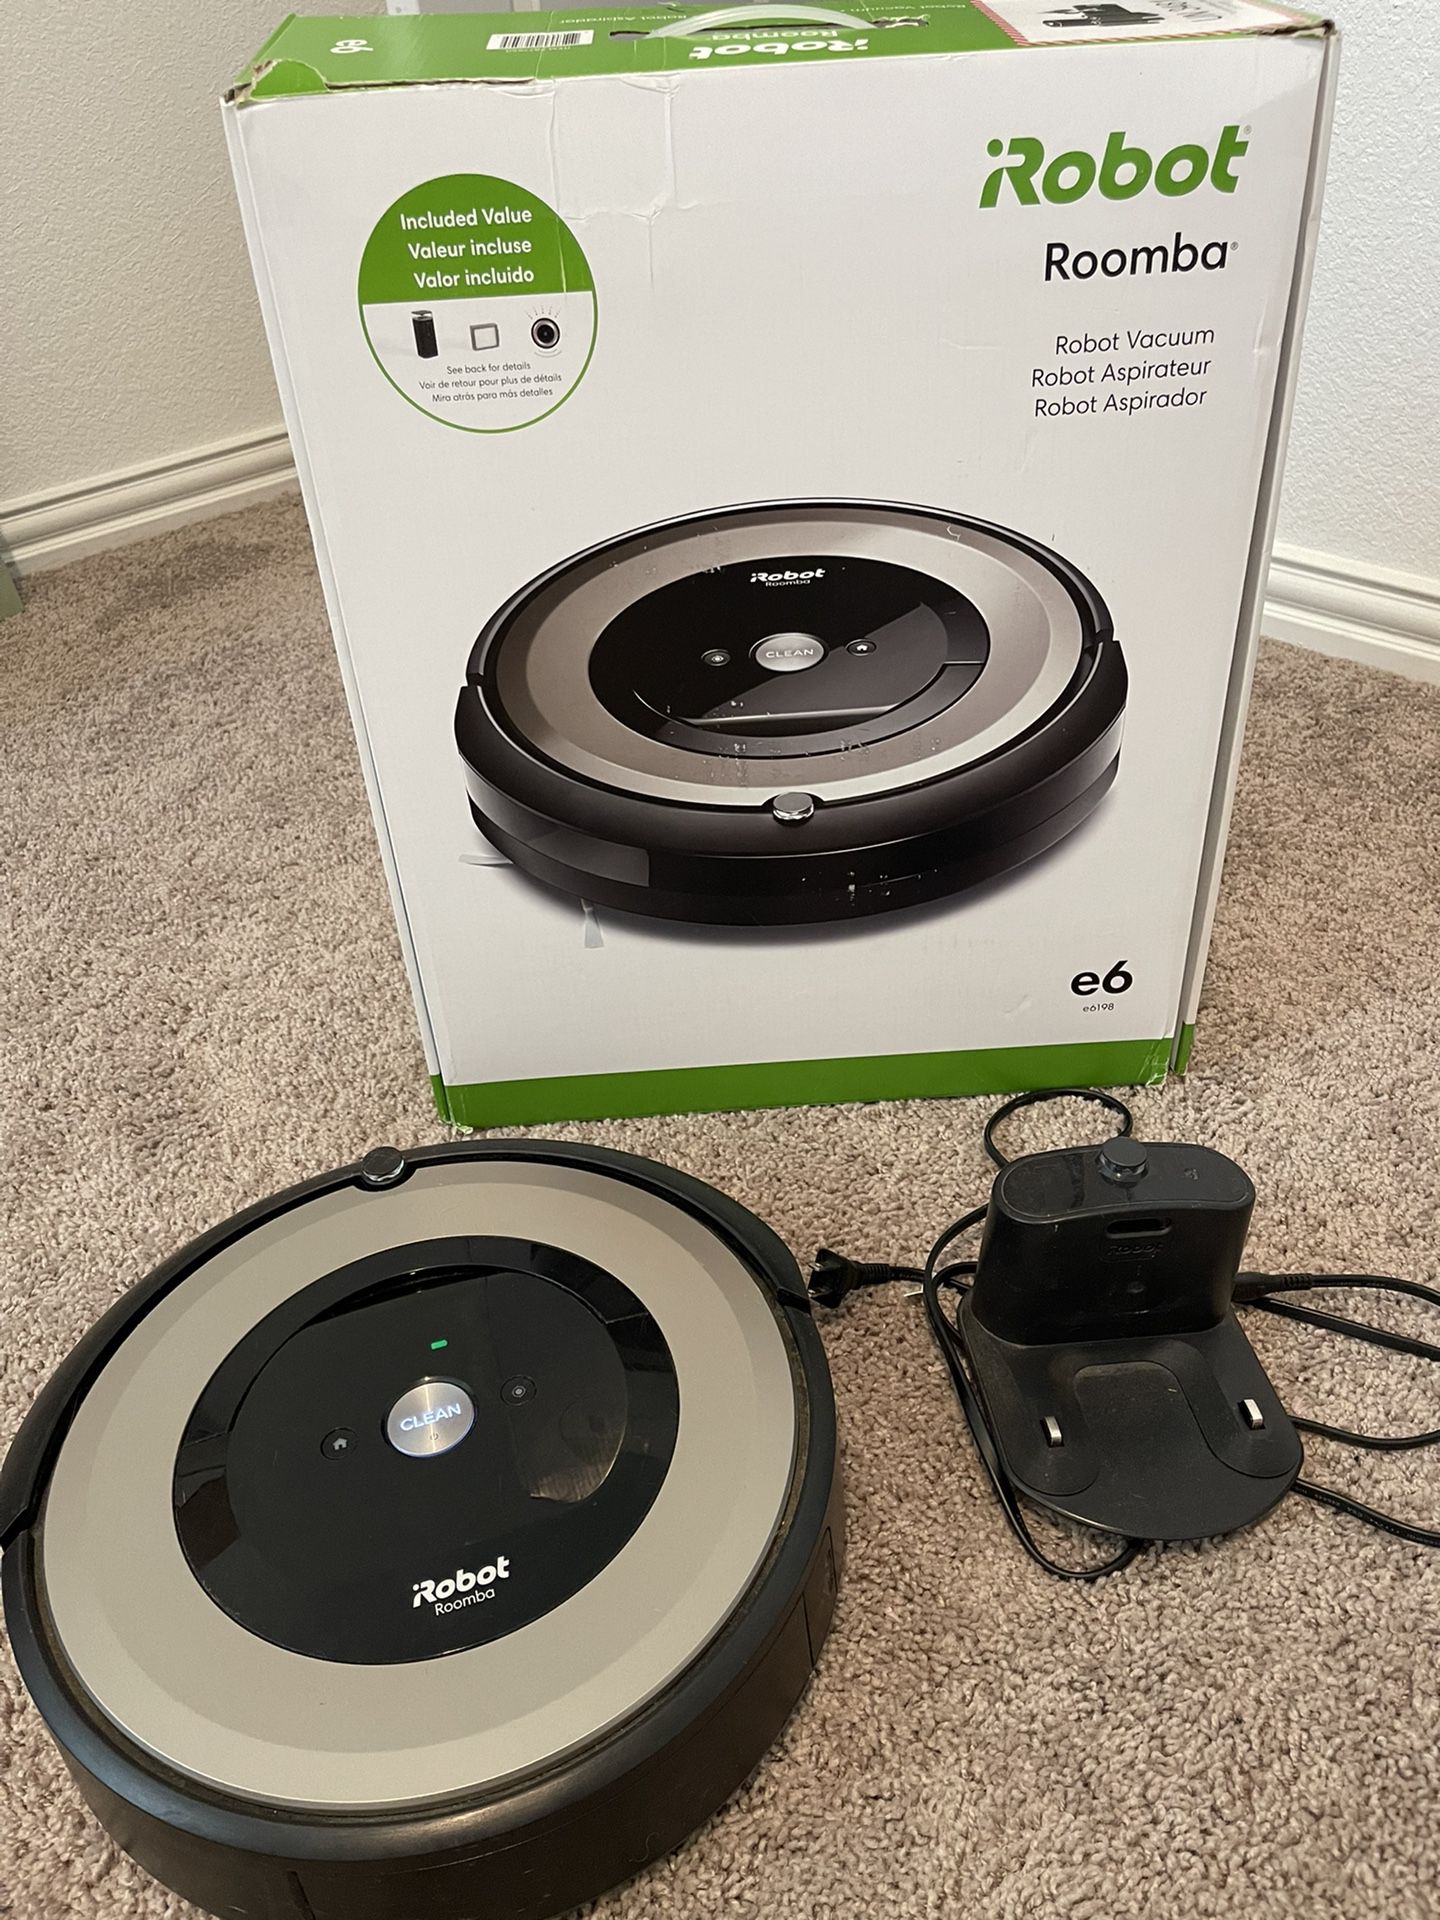 IRobot Roomba e6 (6198) Wi-Fi Connected Robotic Vacuum Cleaner